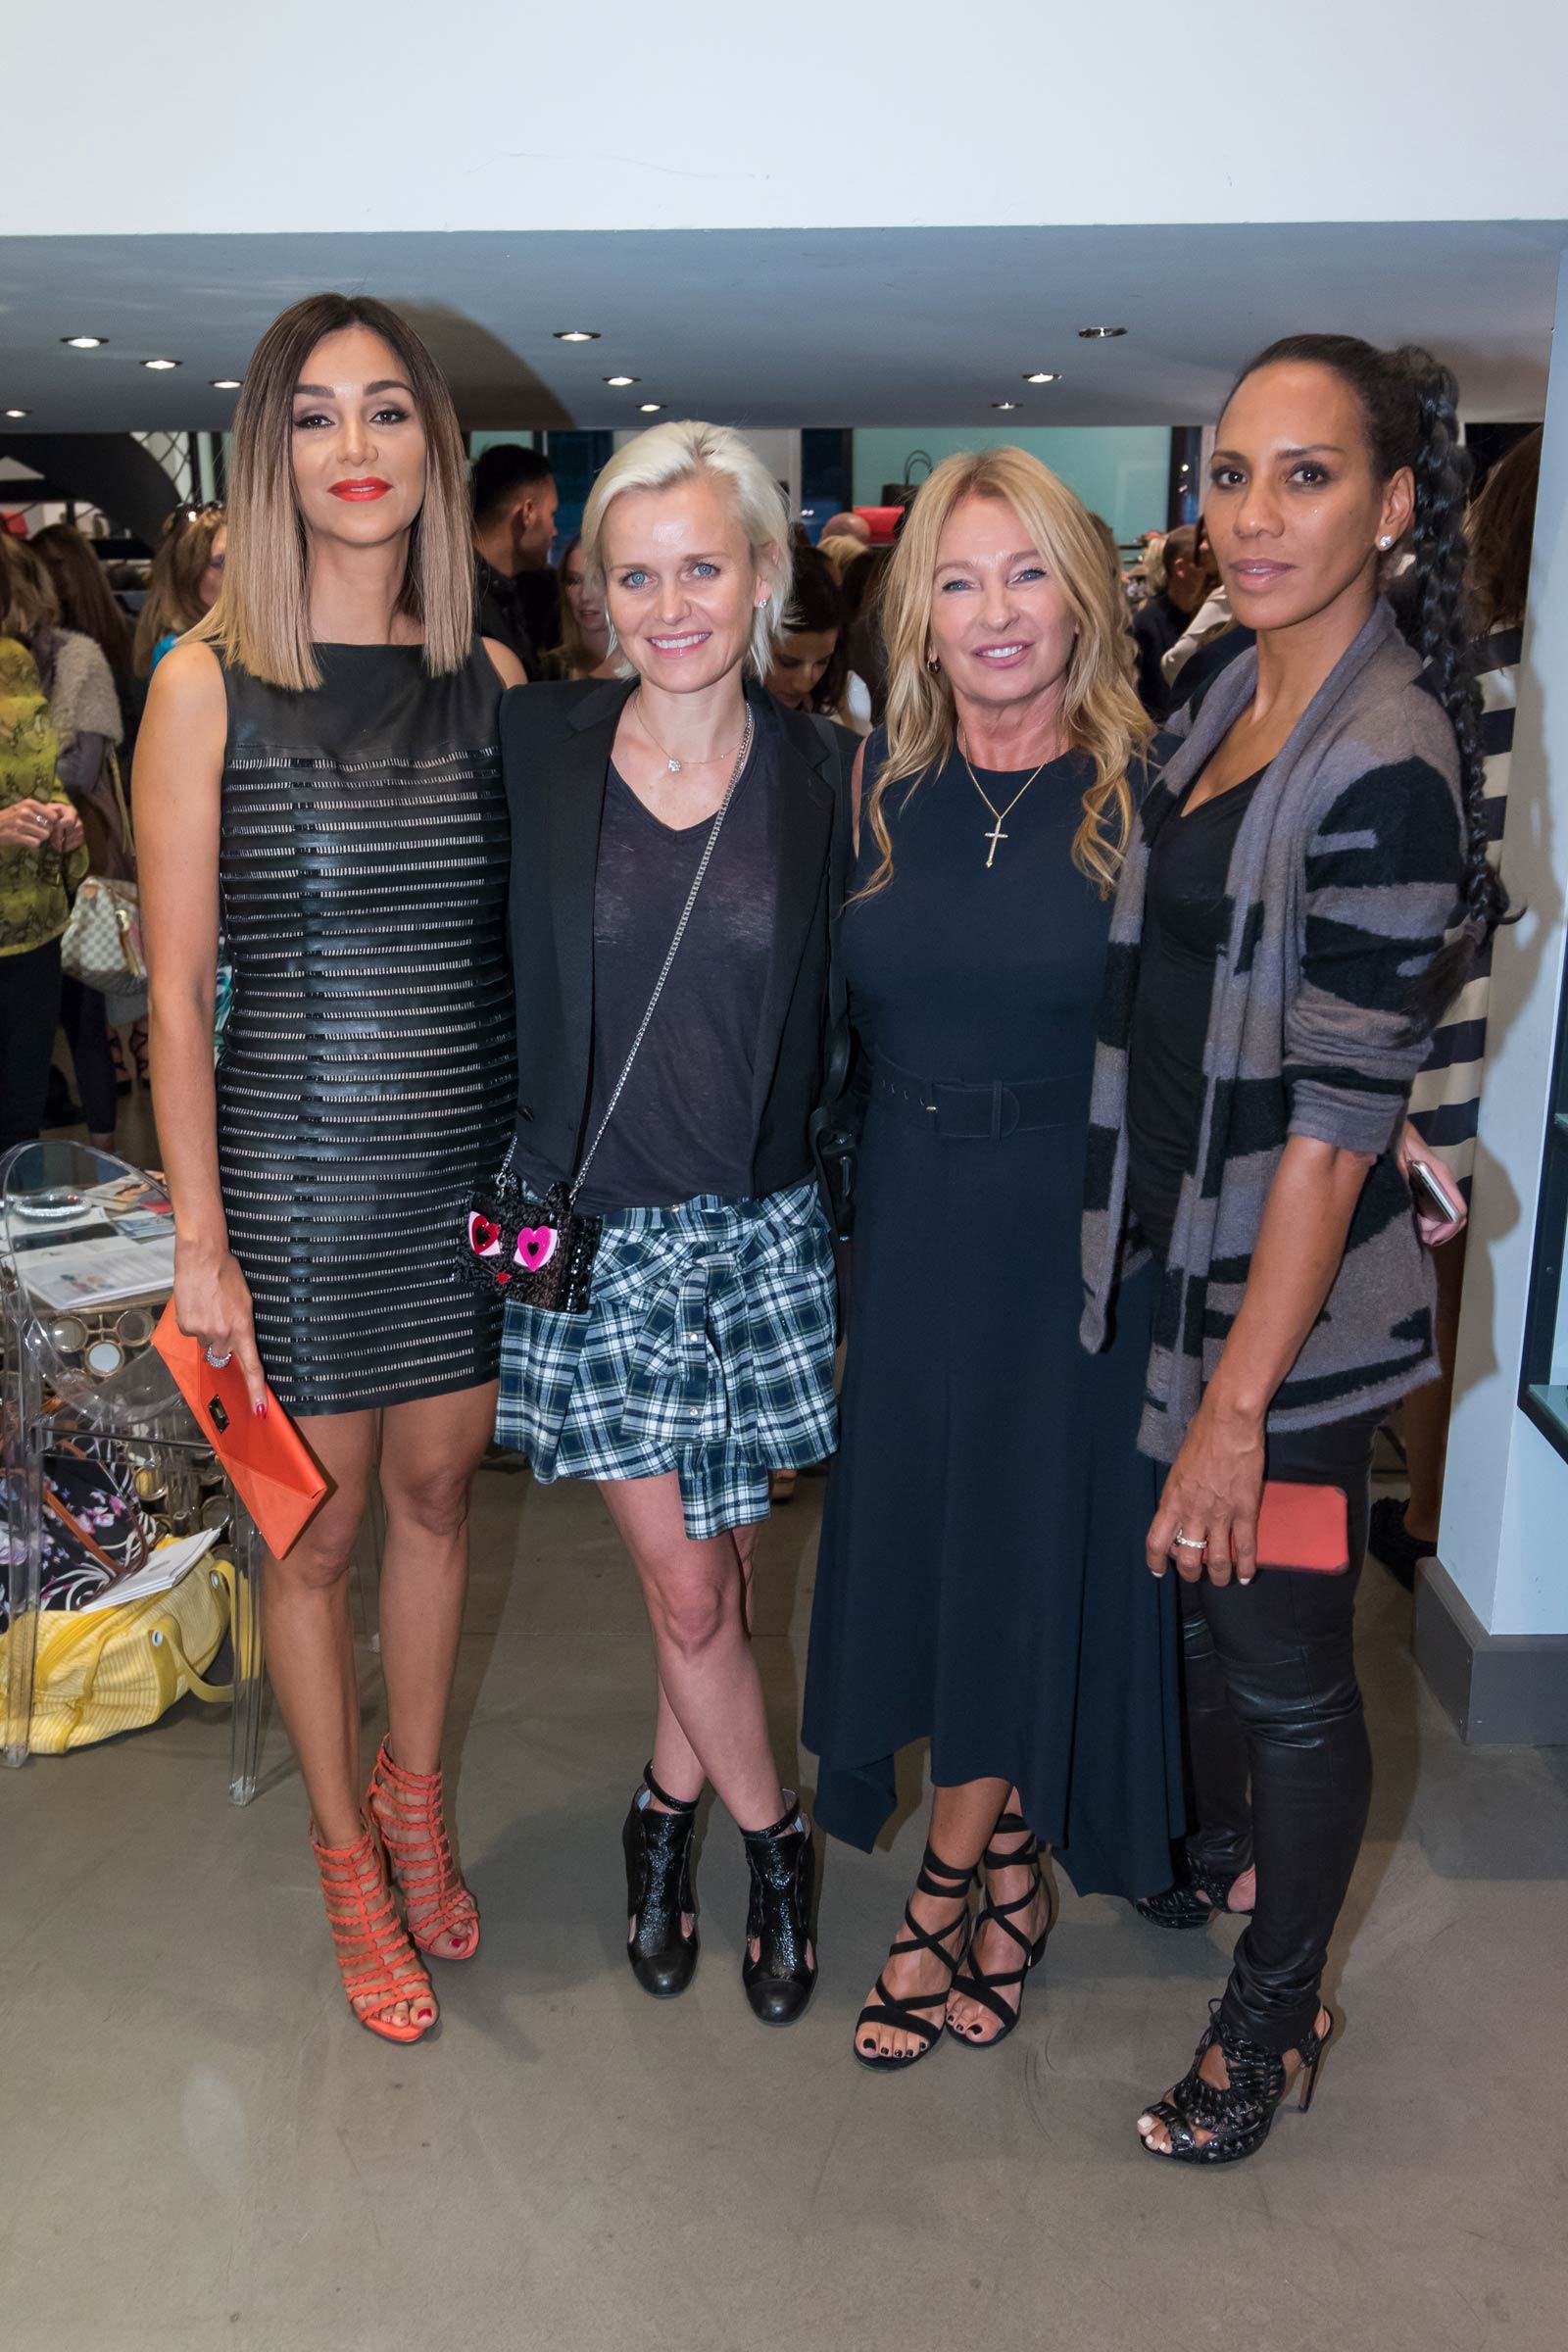 Verona Pooth attends Vogue Fashion’s Night Out